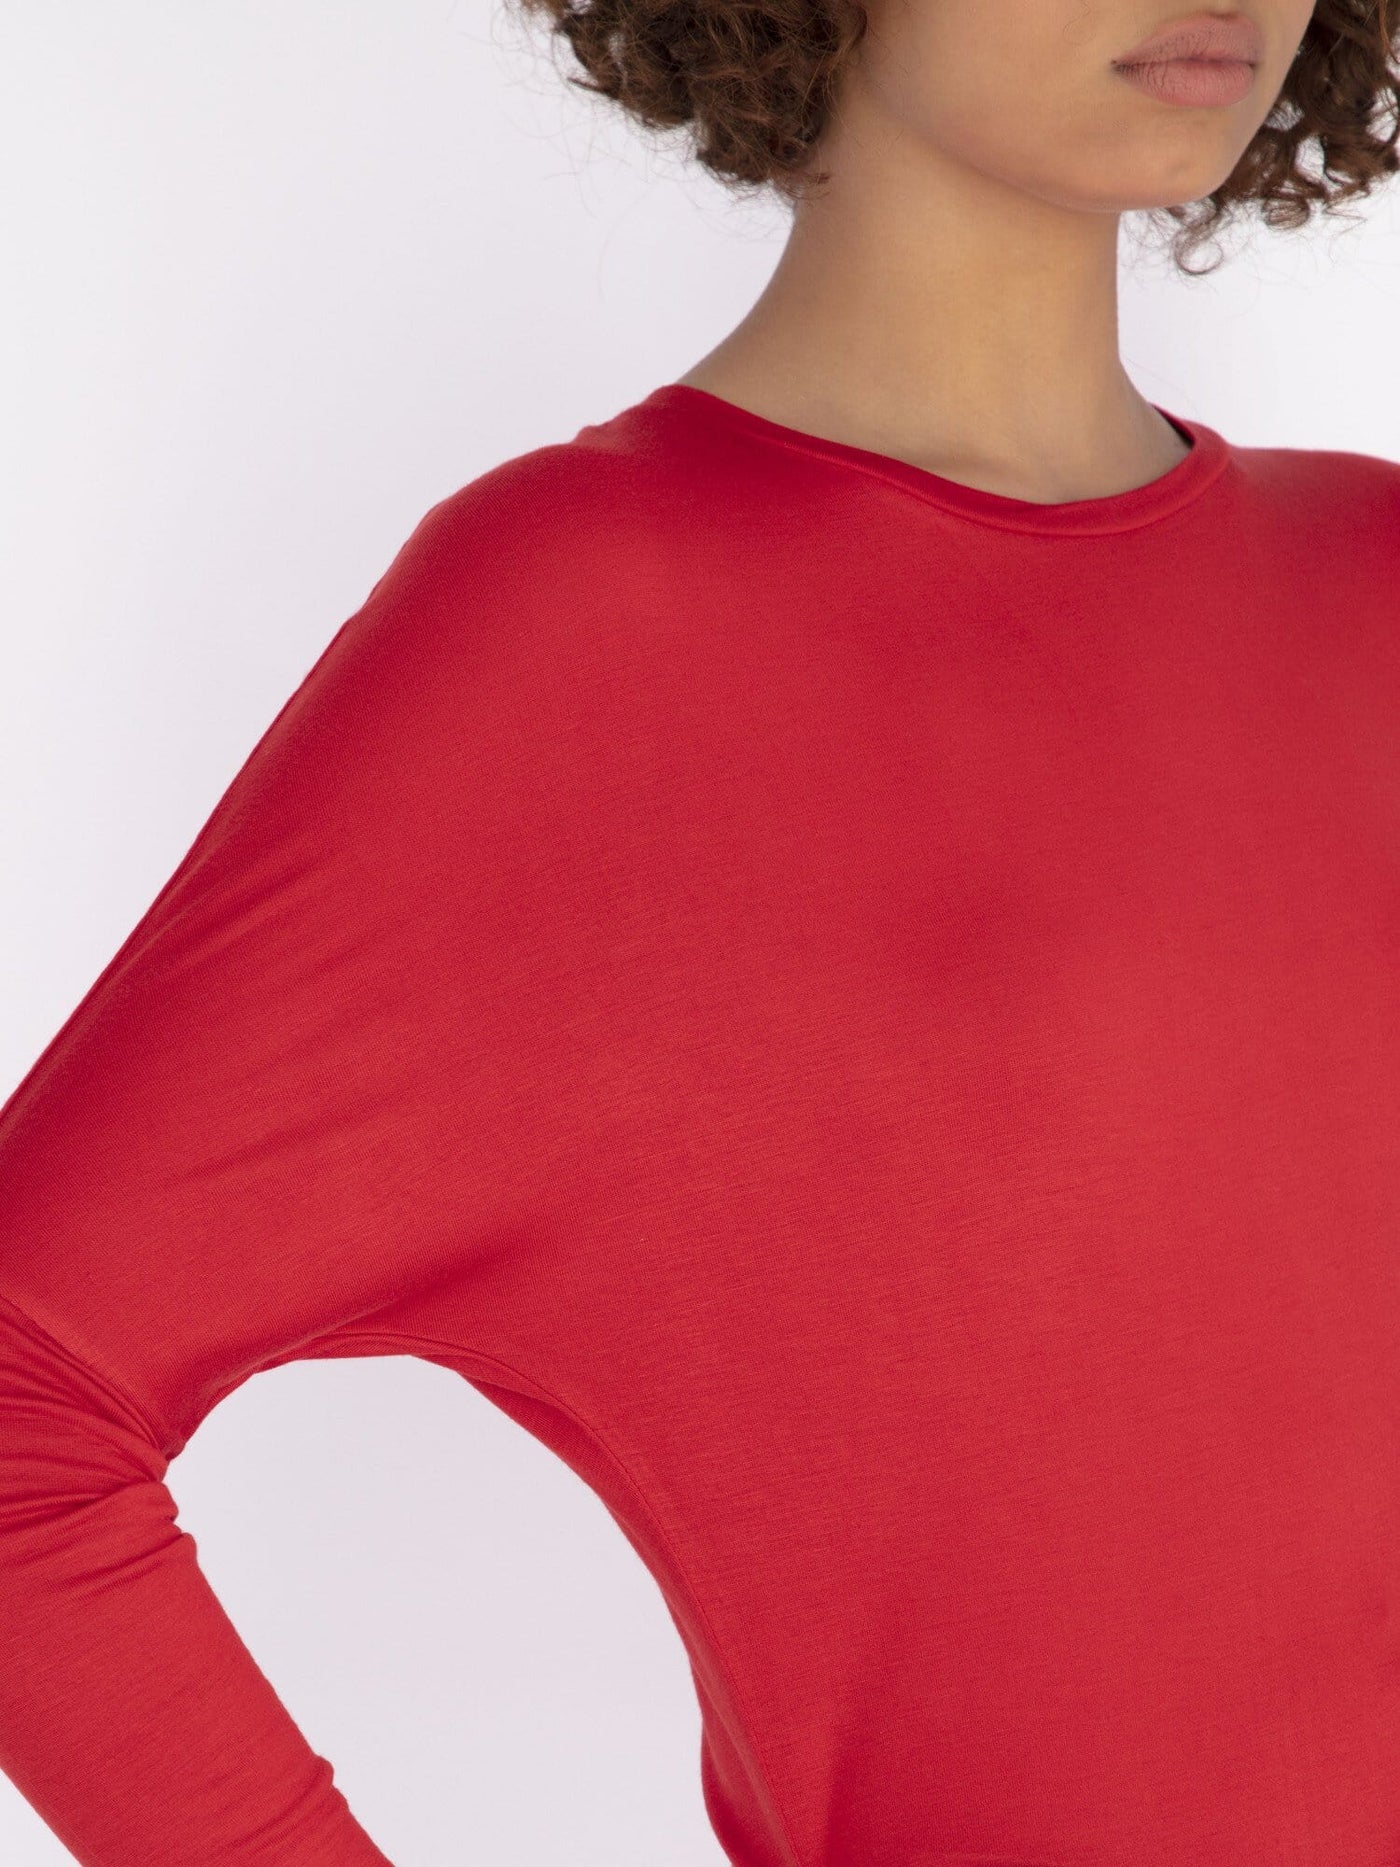 OR Tops & Blouses Basic Long Batwing Sleeve Top